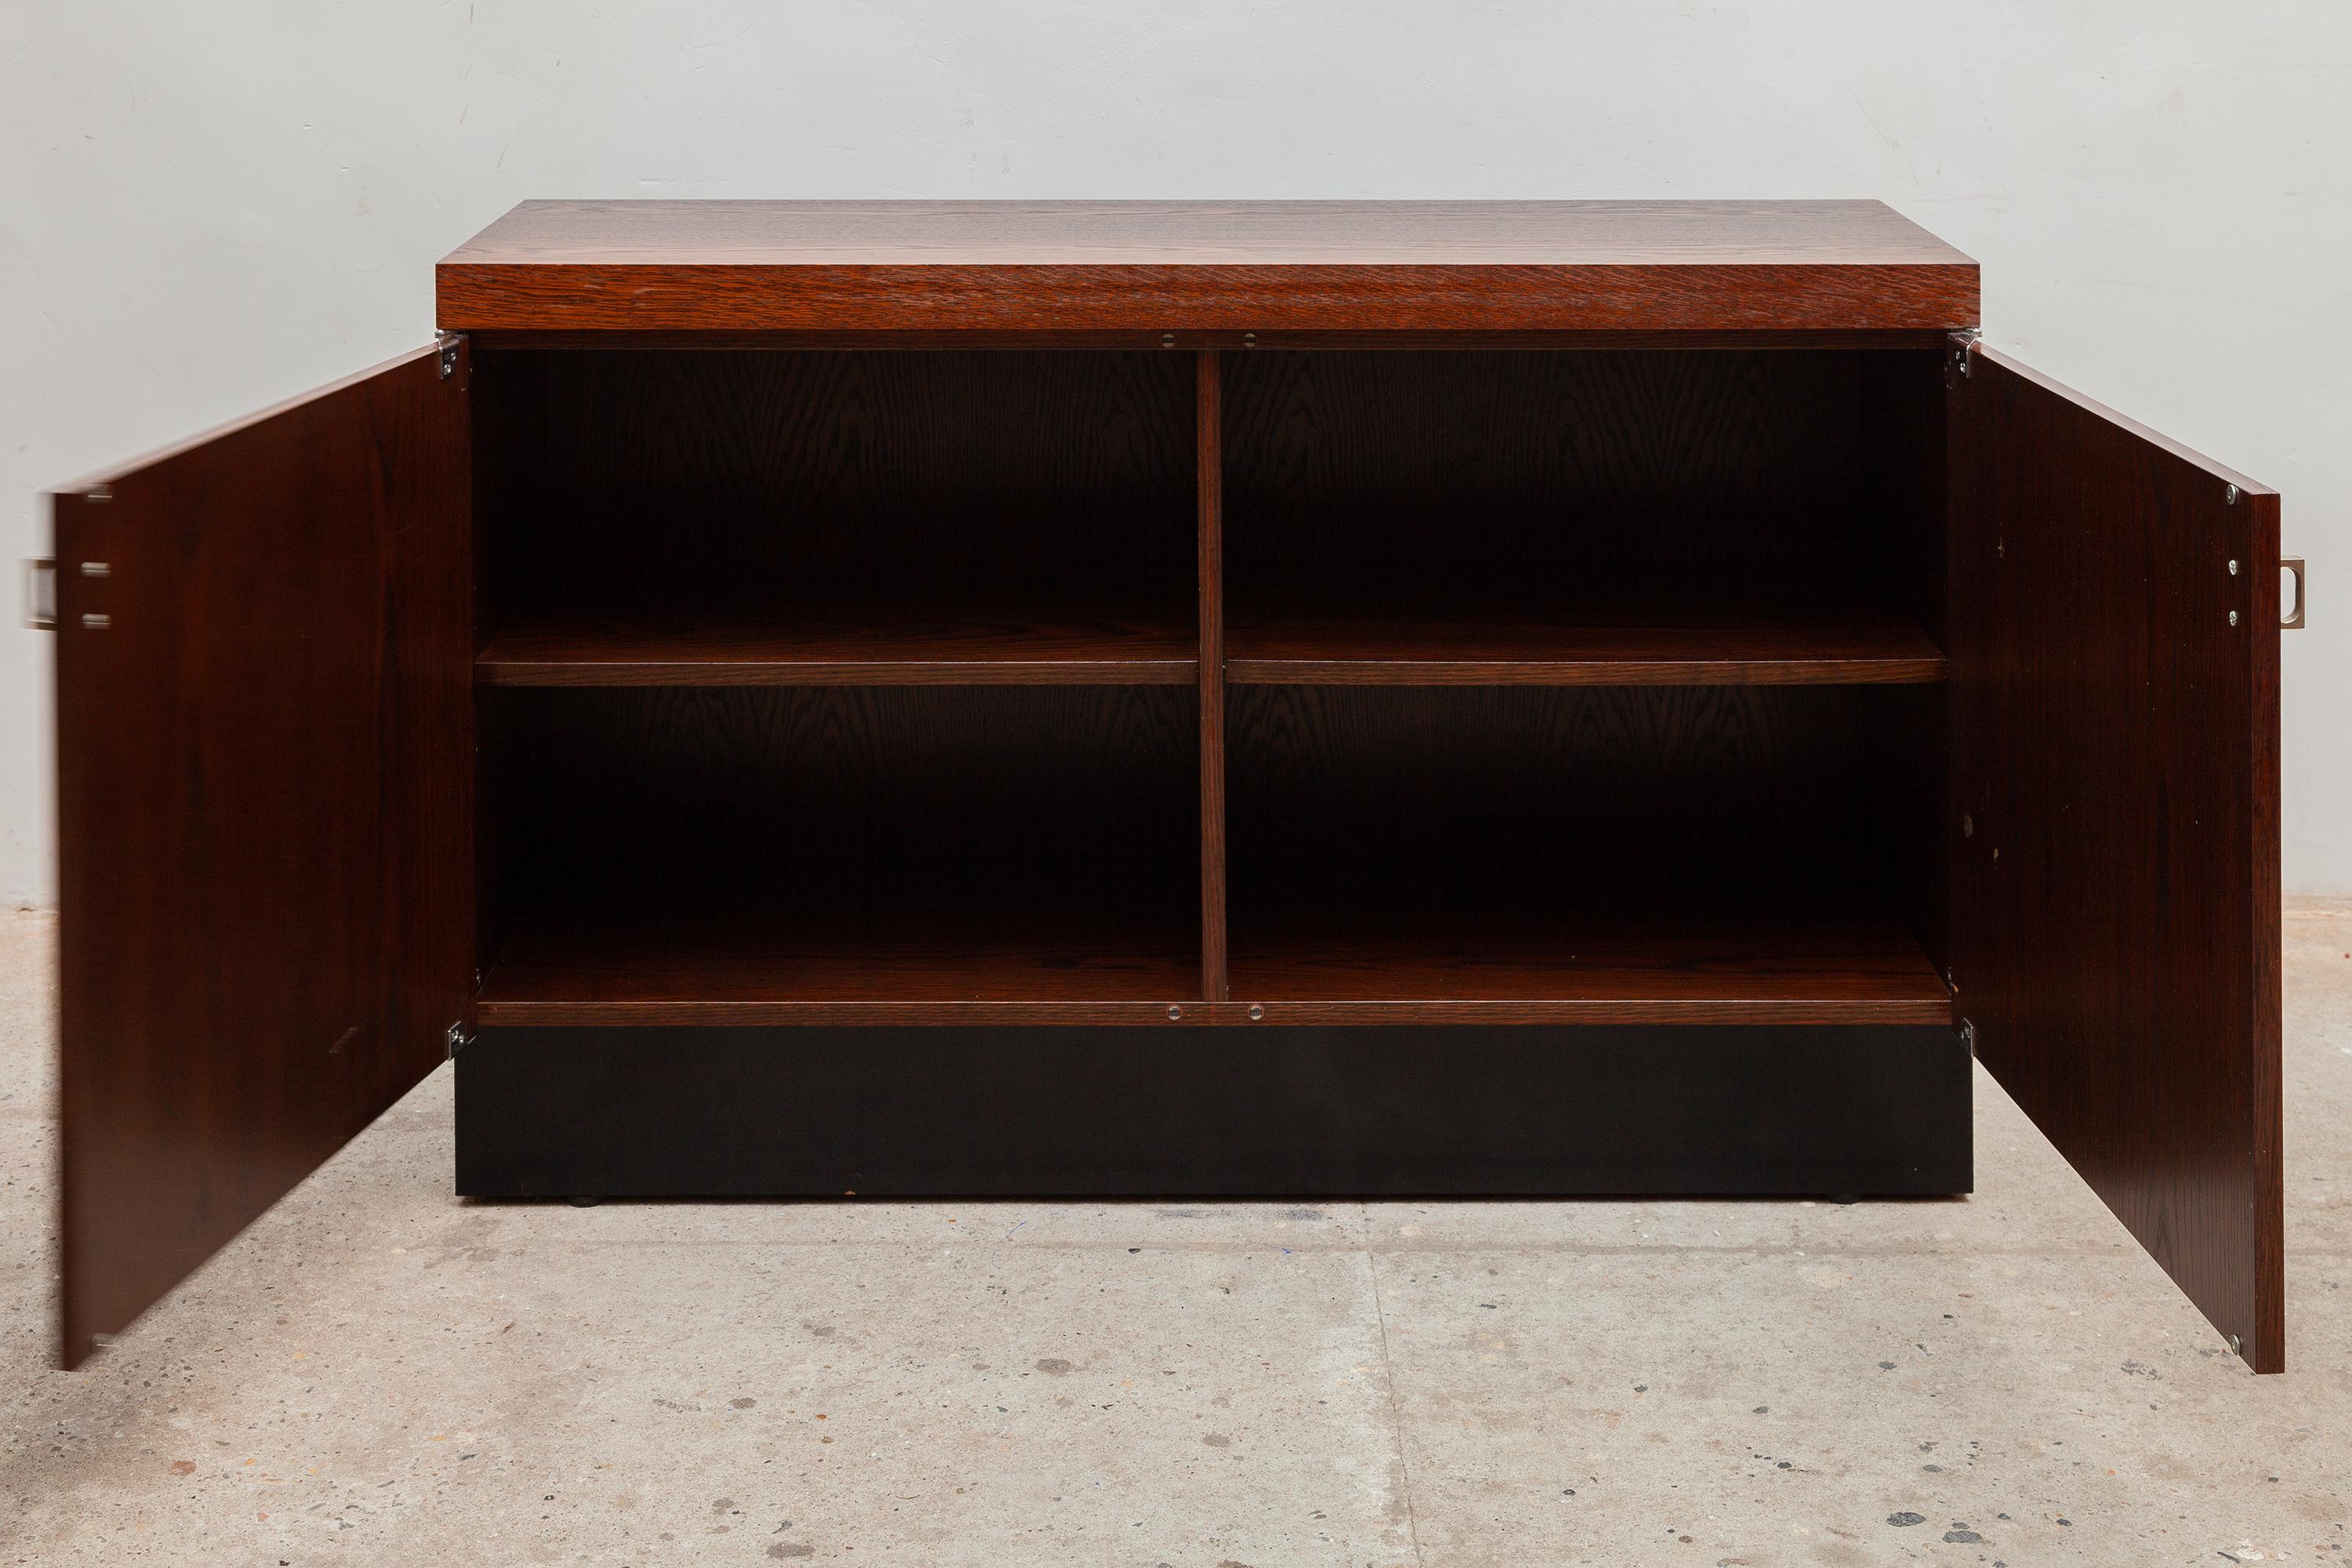 Vintage Mid-century credenza by De Coene, Belgium. Rich stained oak with floating black base. The back is fully finished and can be shown. Cabinet with shelves and magnetic door closures.
A functional design and according to modulations standard